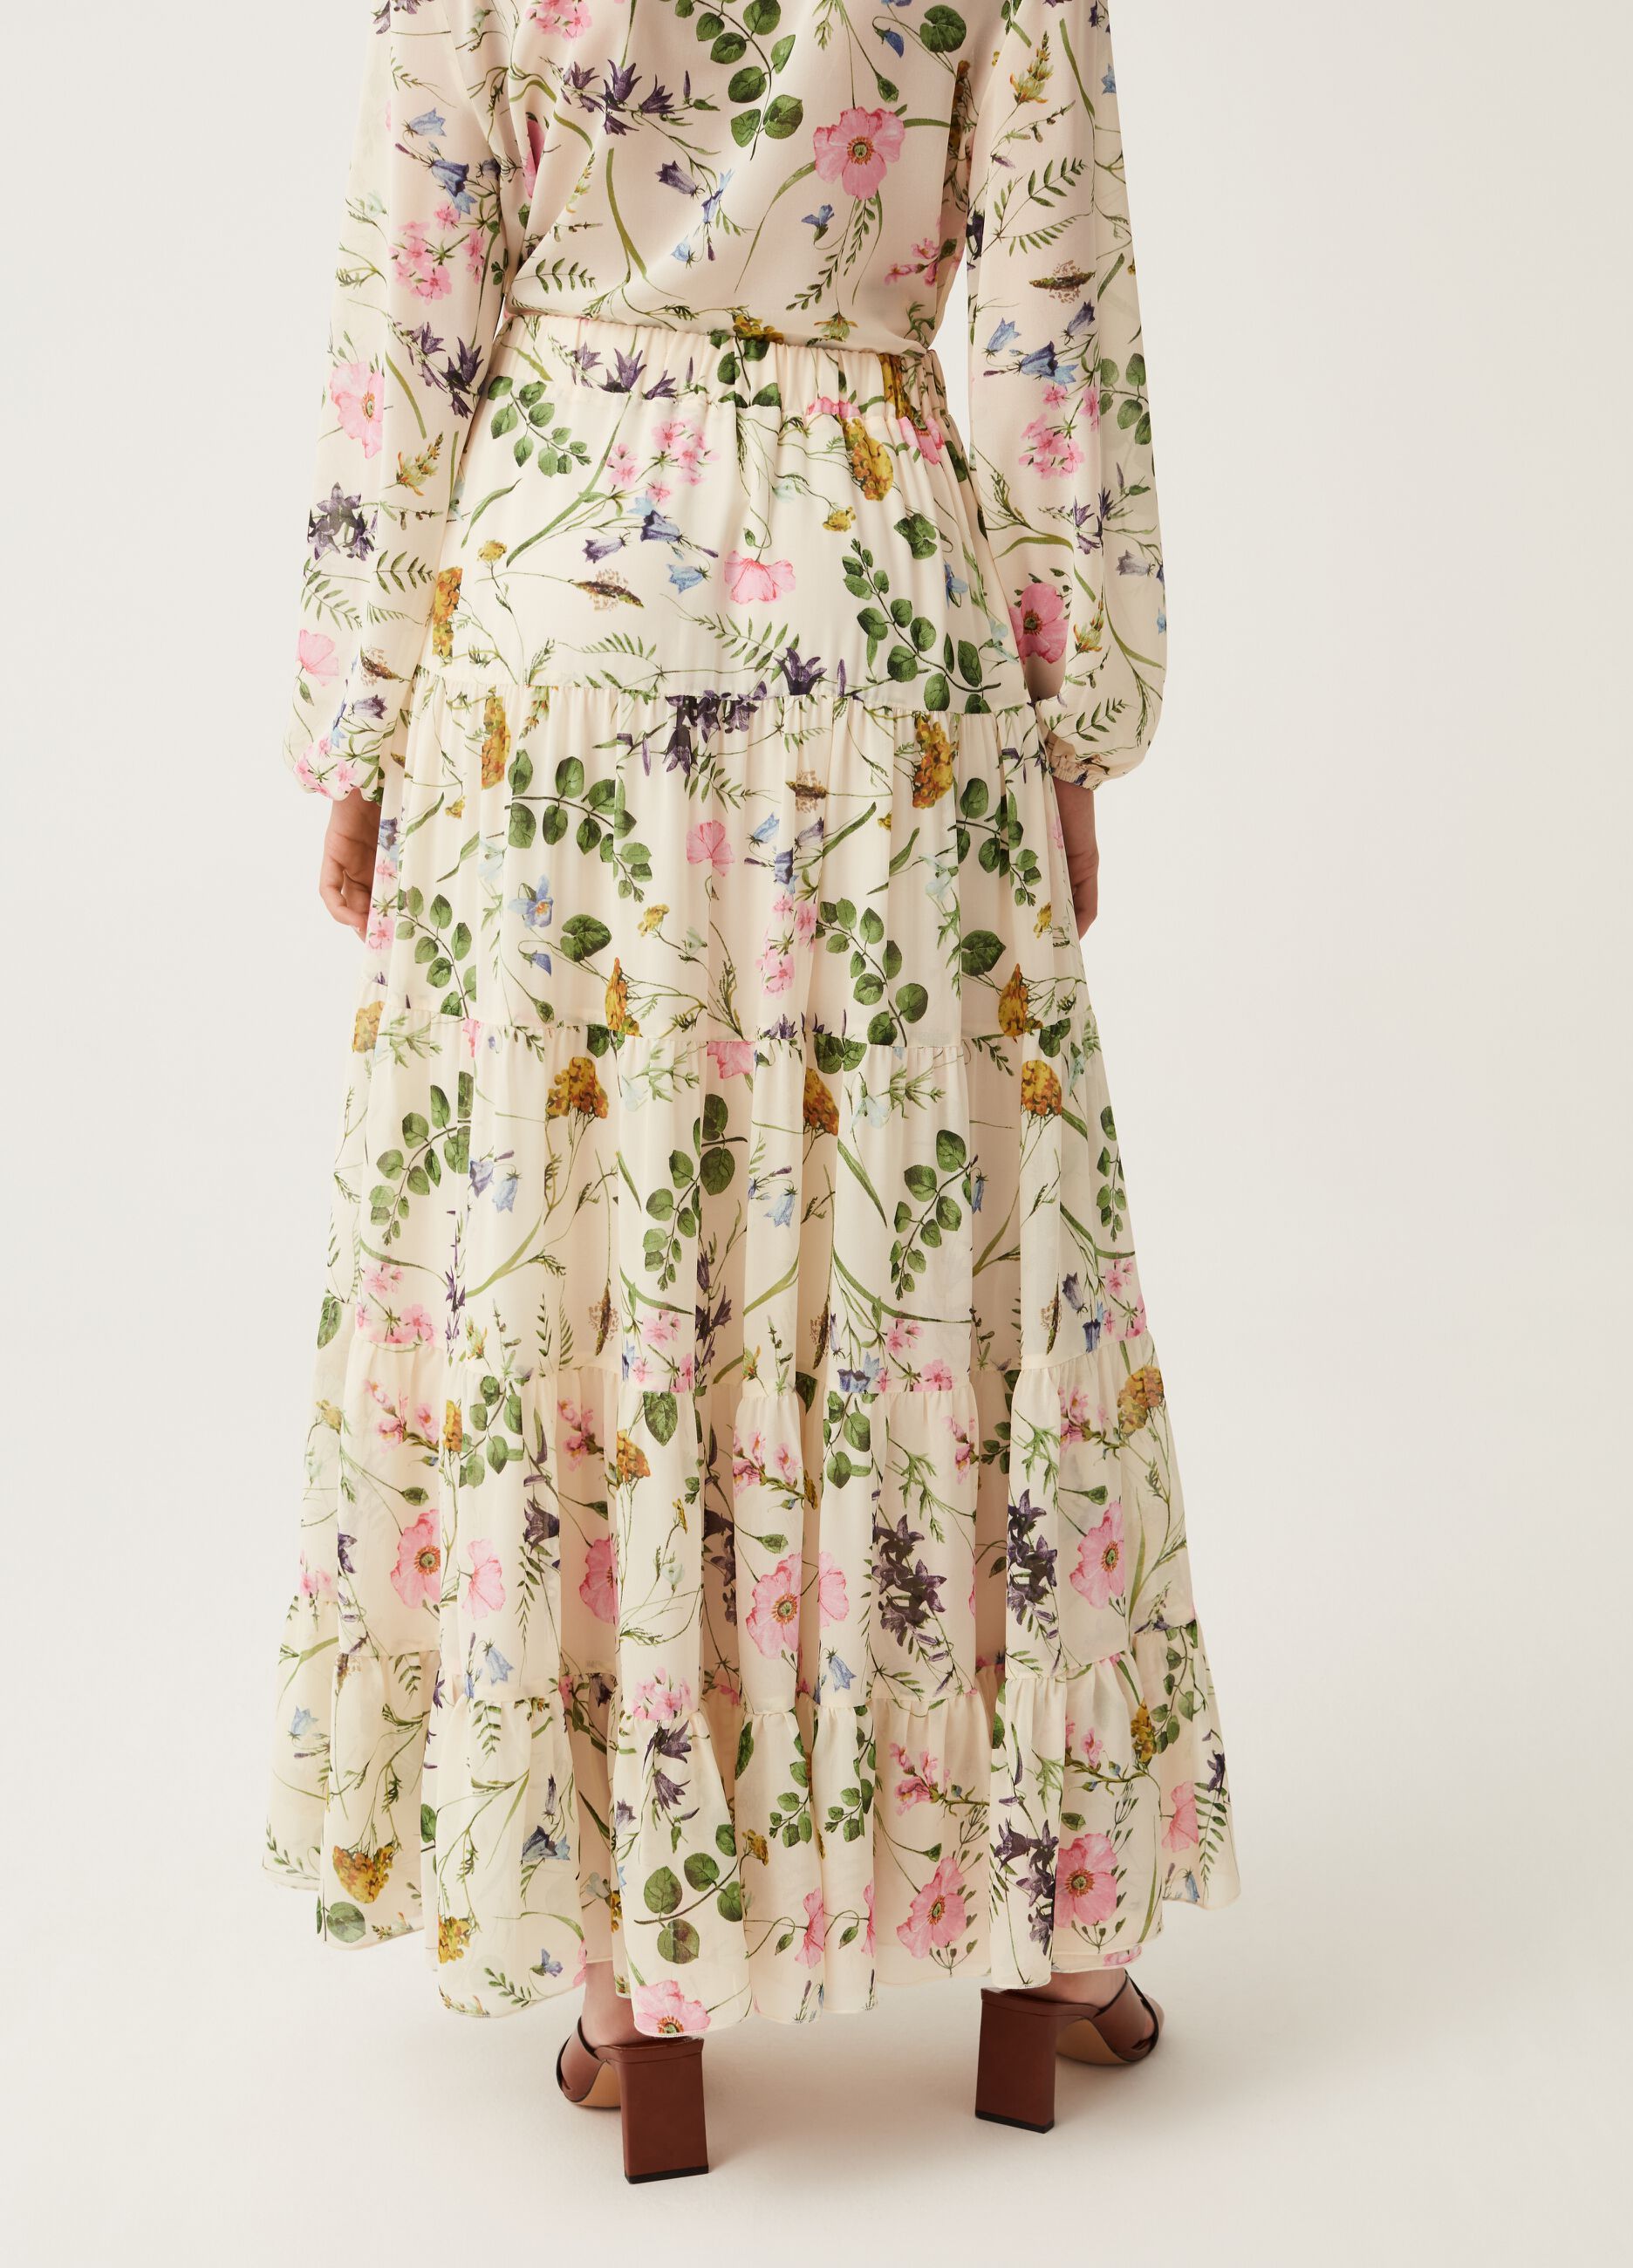 Long tiered skirt with floral print